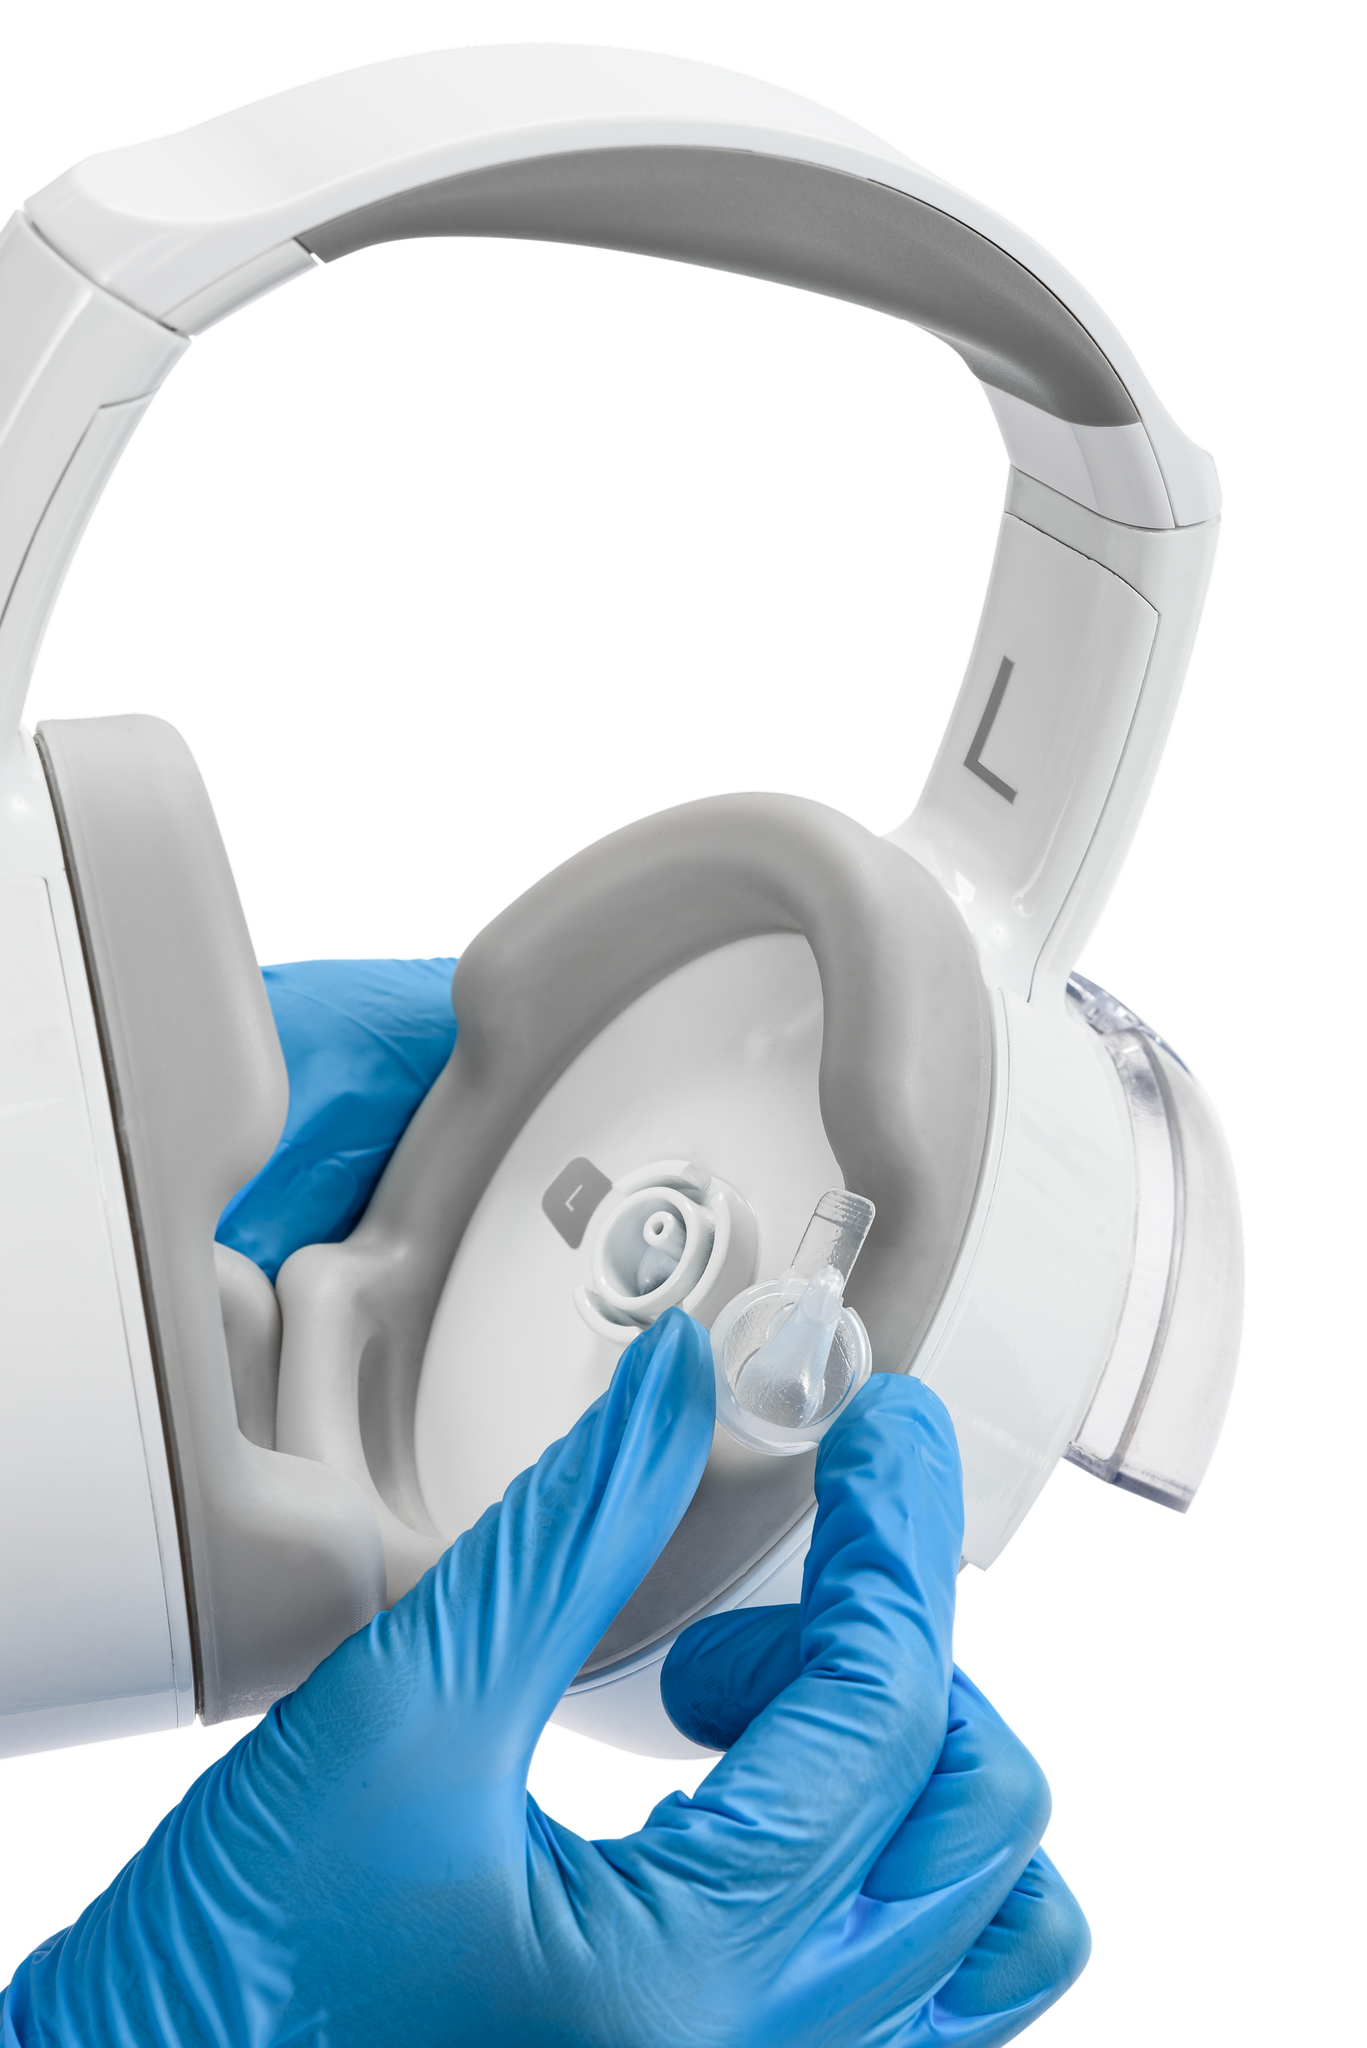 Introducing the FDA-Cleared OtoSet® Ear Cleaning System 